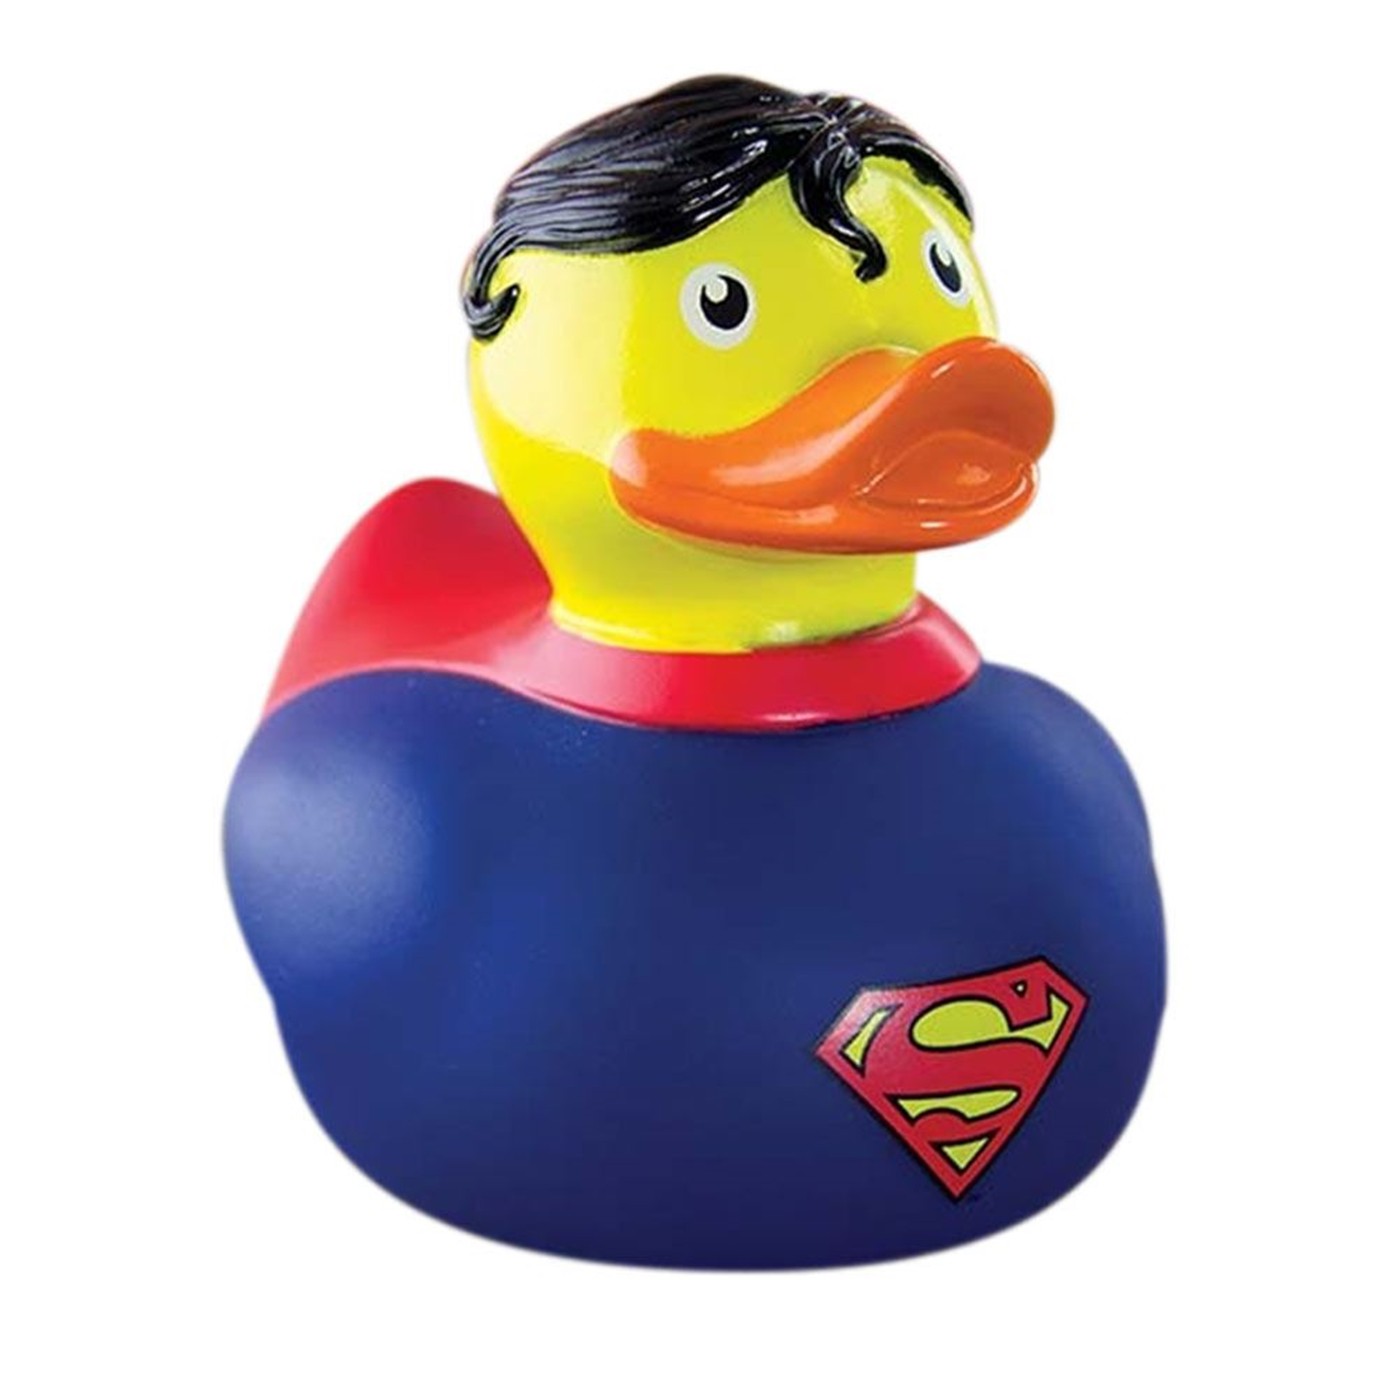 Rubber ducky wholesale clothing